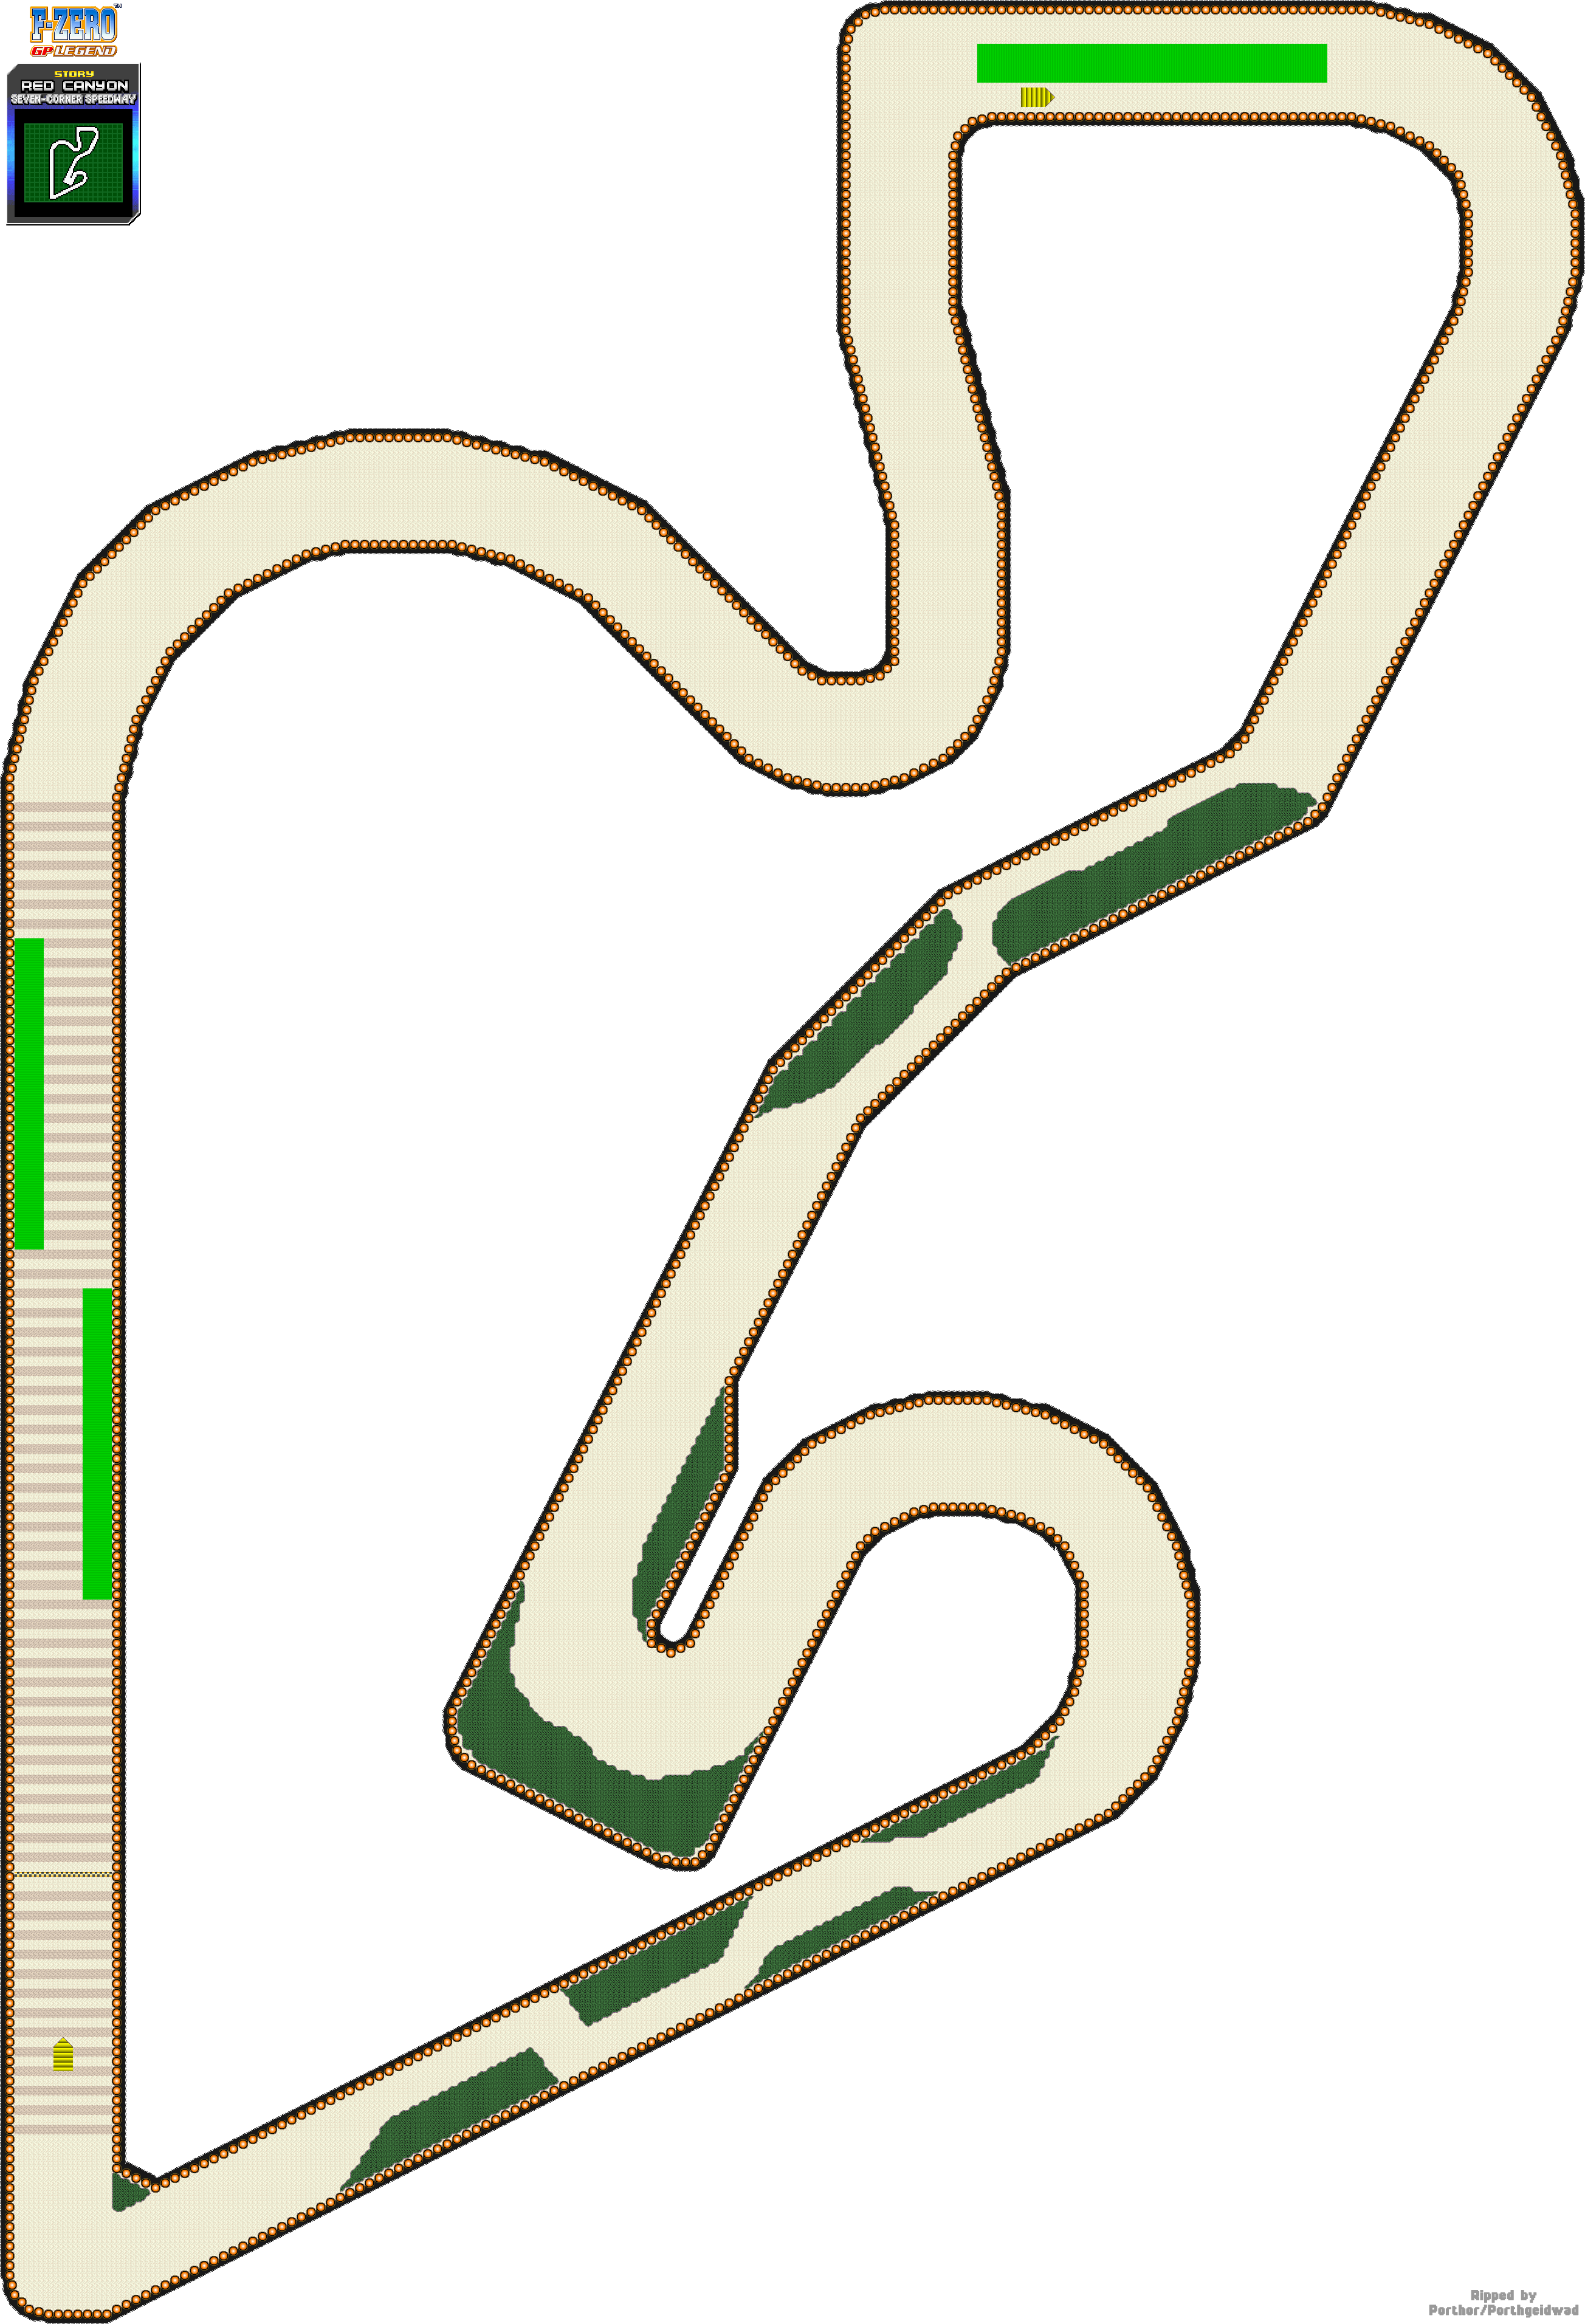 Red Canyon - Seven-Corner Speedway